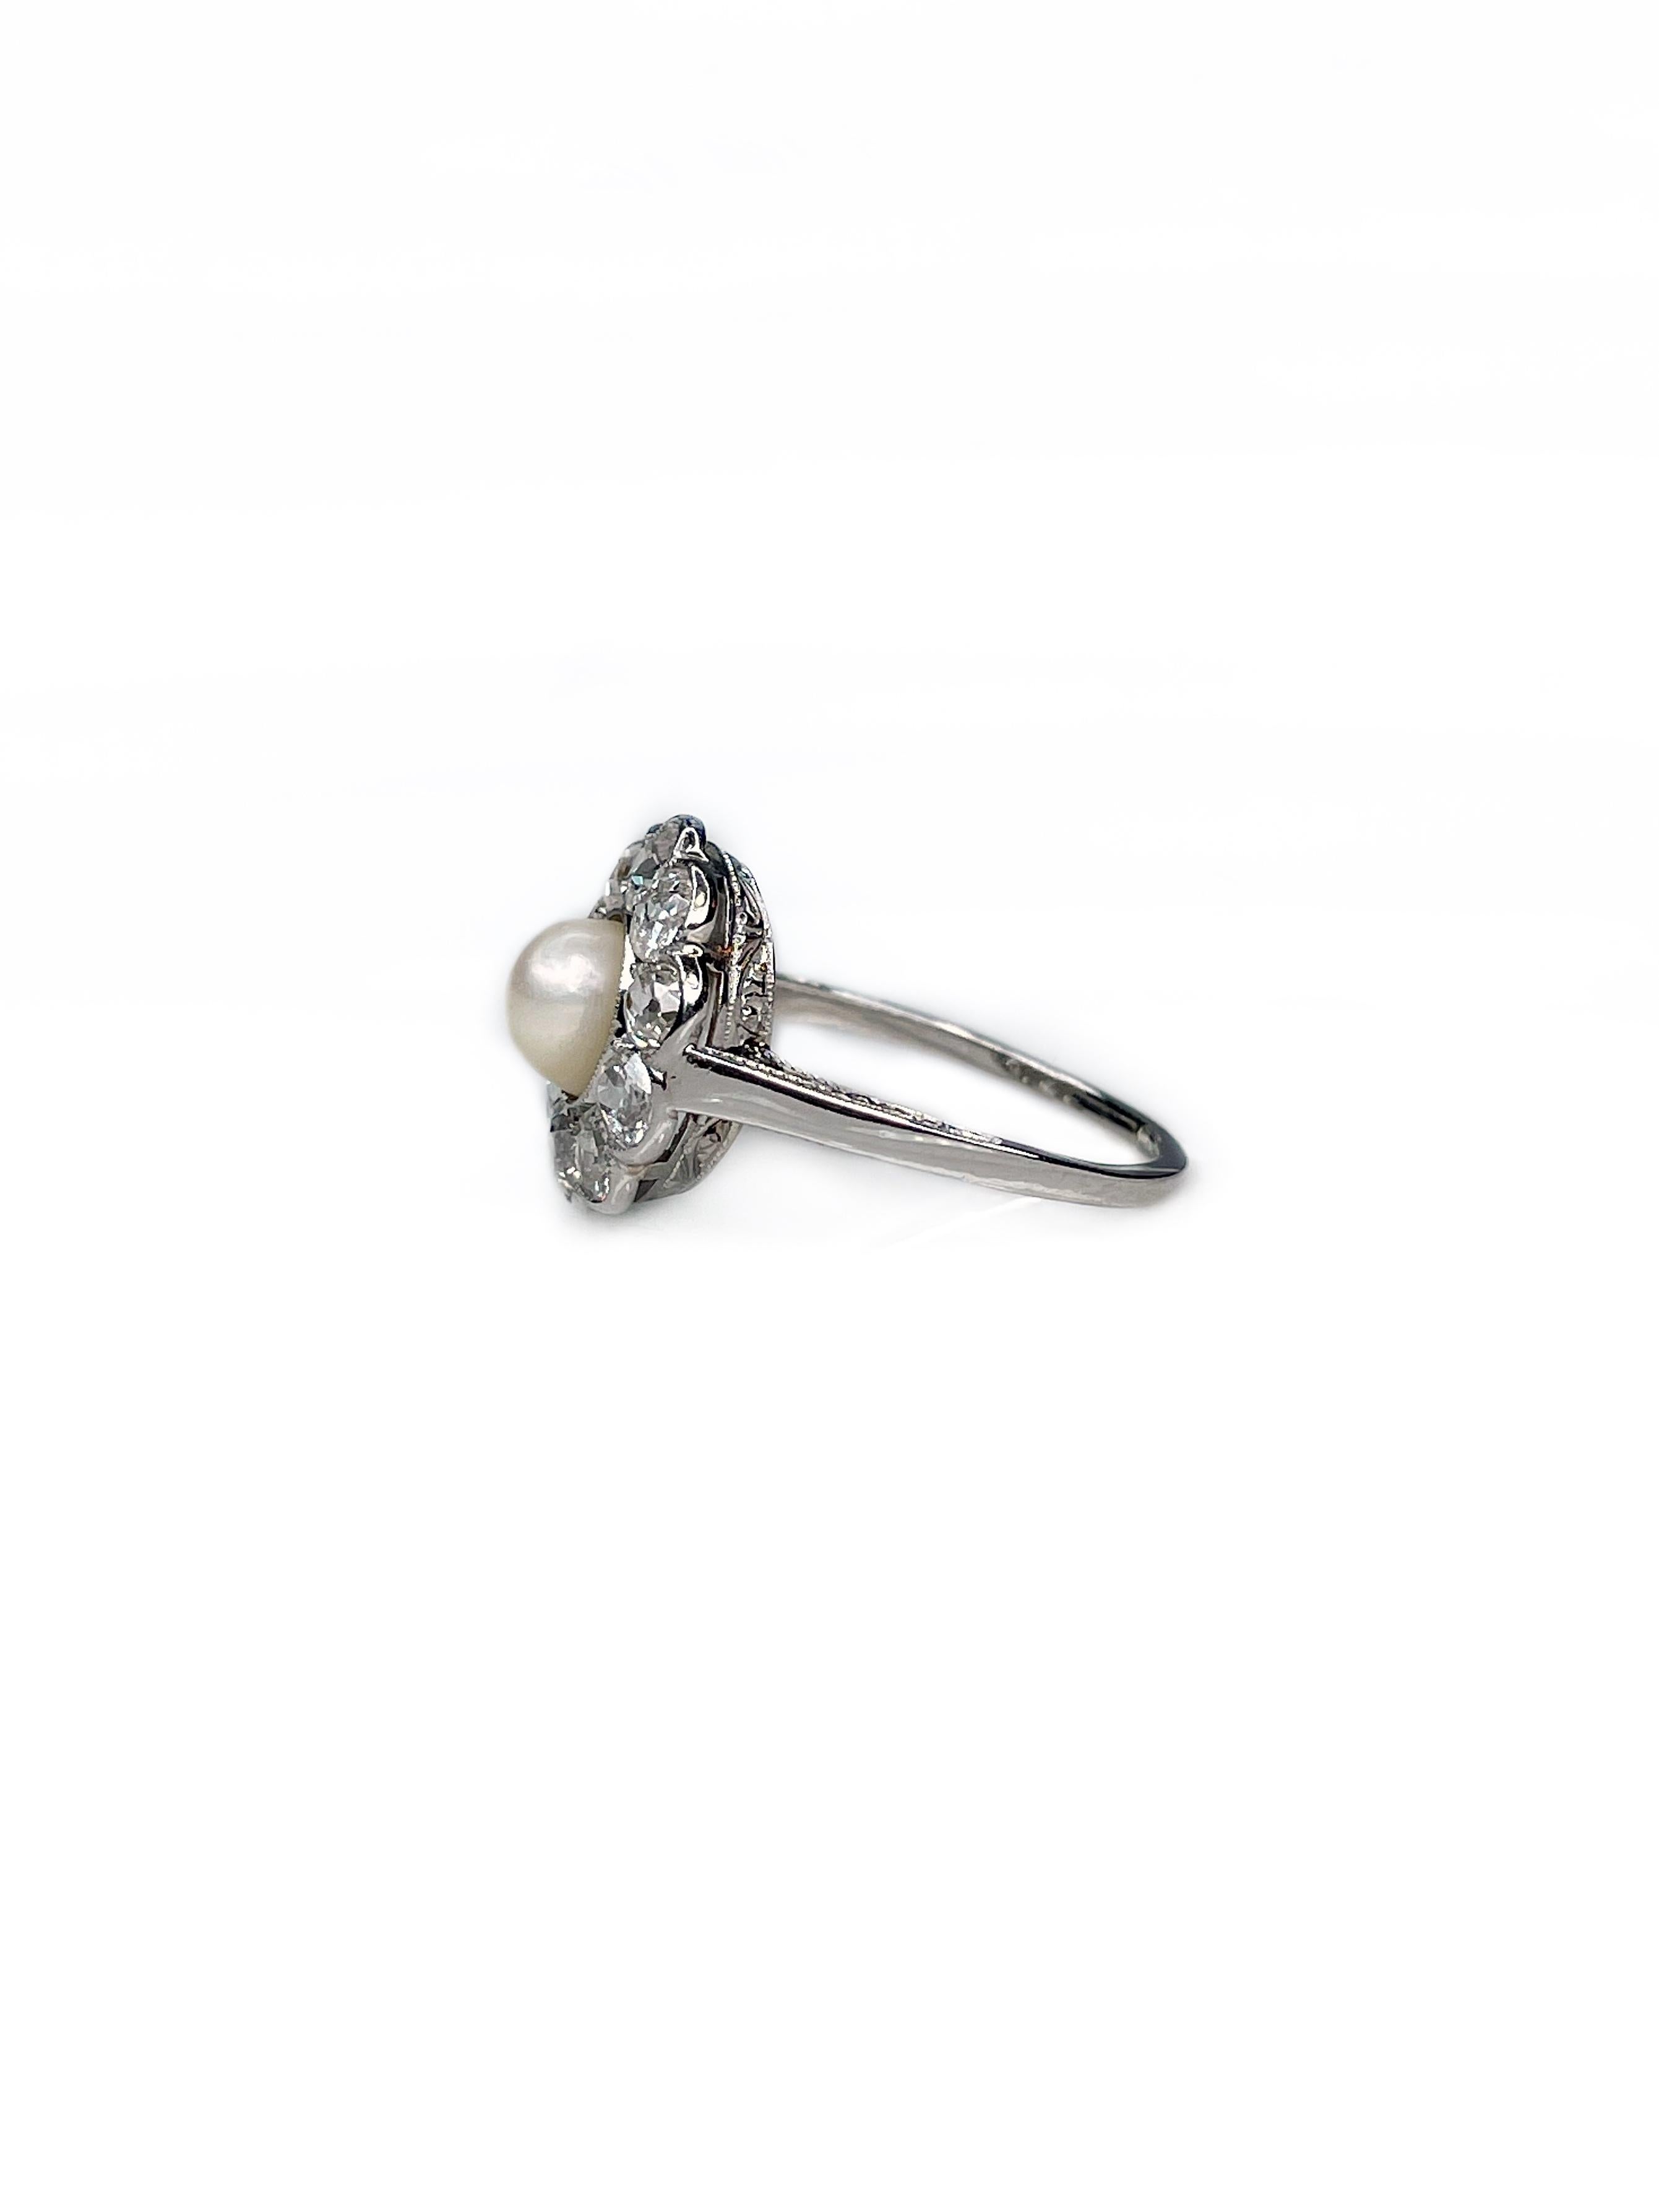 This is a beautiful flower shape cluster ring crafted in 950 hallmark platinum. It is dating from a Victorian period. 

The piece features a cultured pearl in the center. It is surrounded by 10 old cut diamonds, which in total weight 1ct, colour is